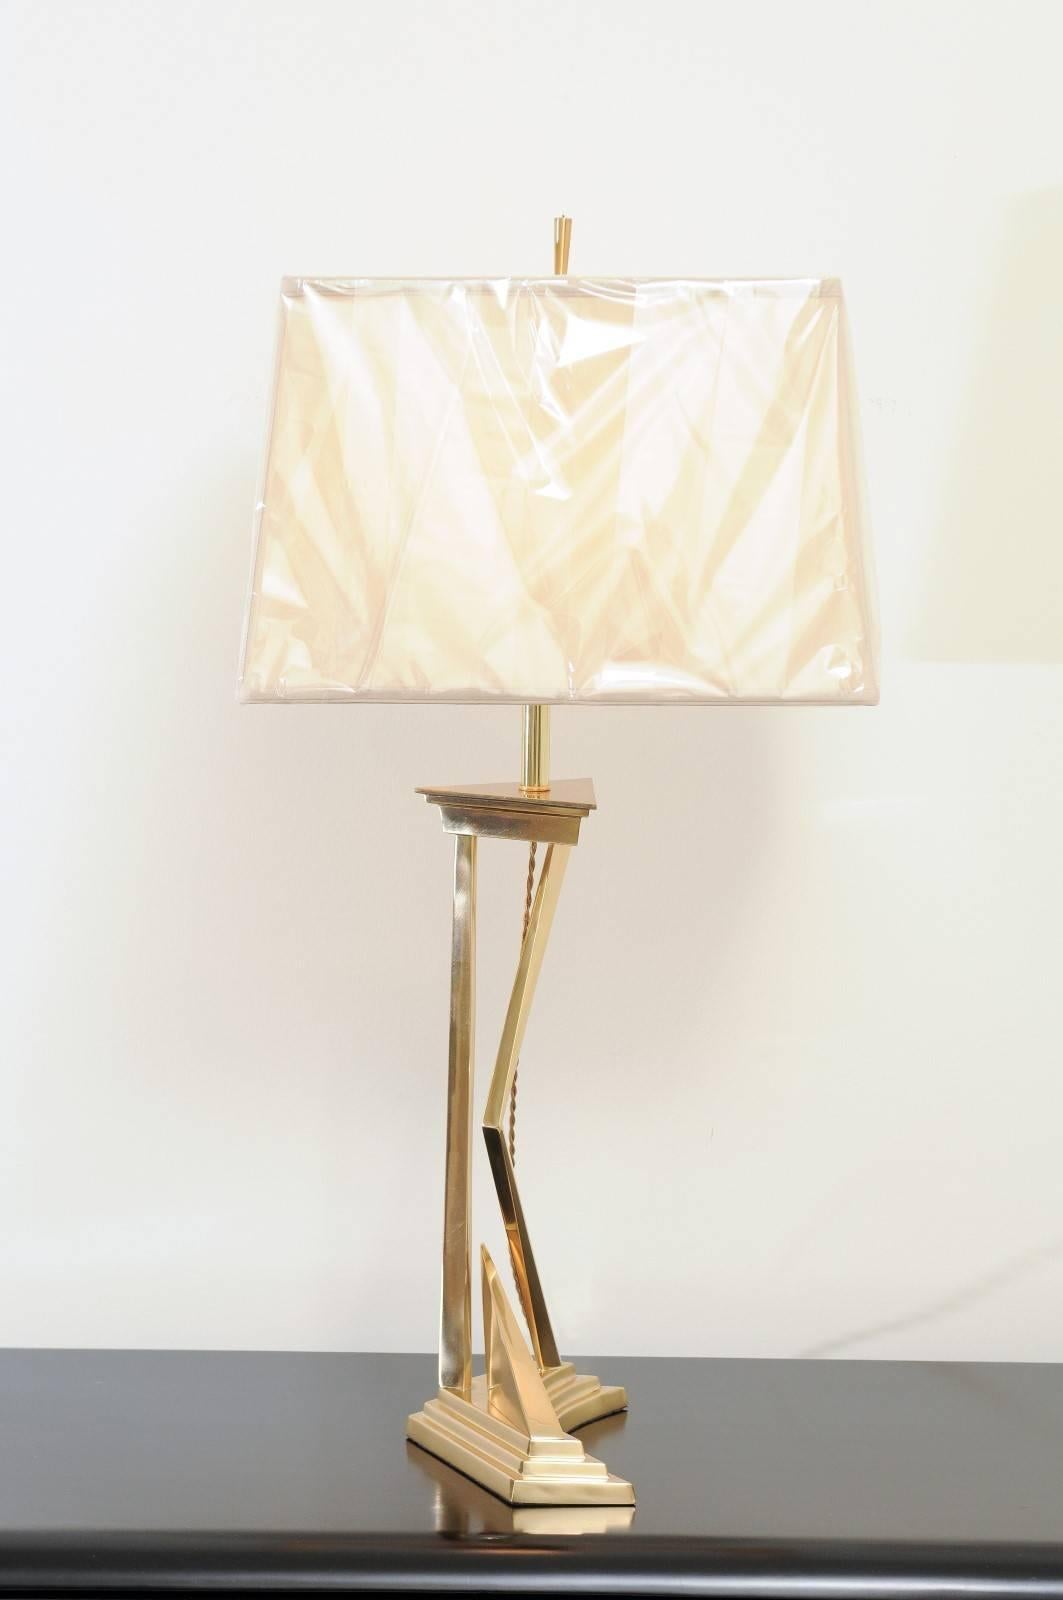 Exquisite Pair of Modern Brass Lamps in the Style of Parzinger, circa 1960 In Excellent Condition For Sale In Atlanta, GA